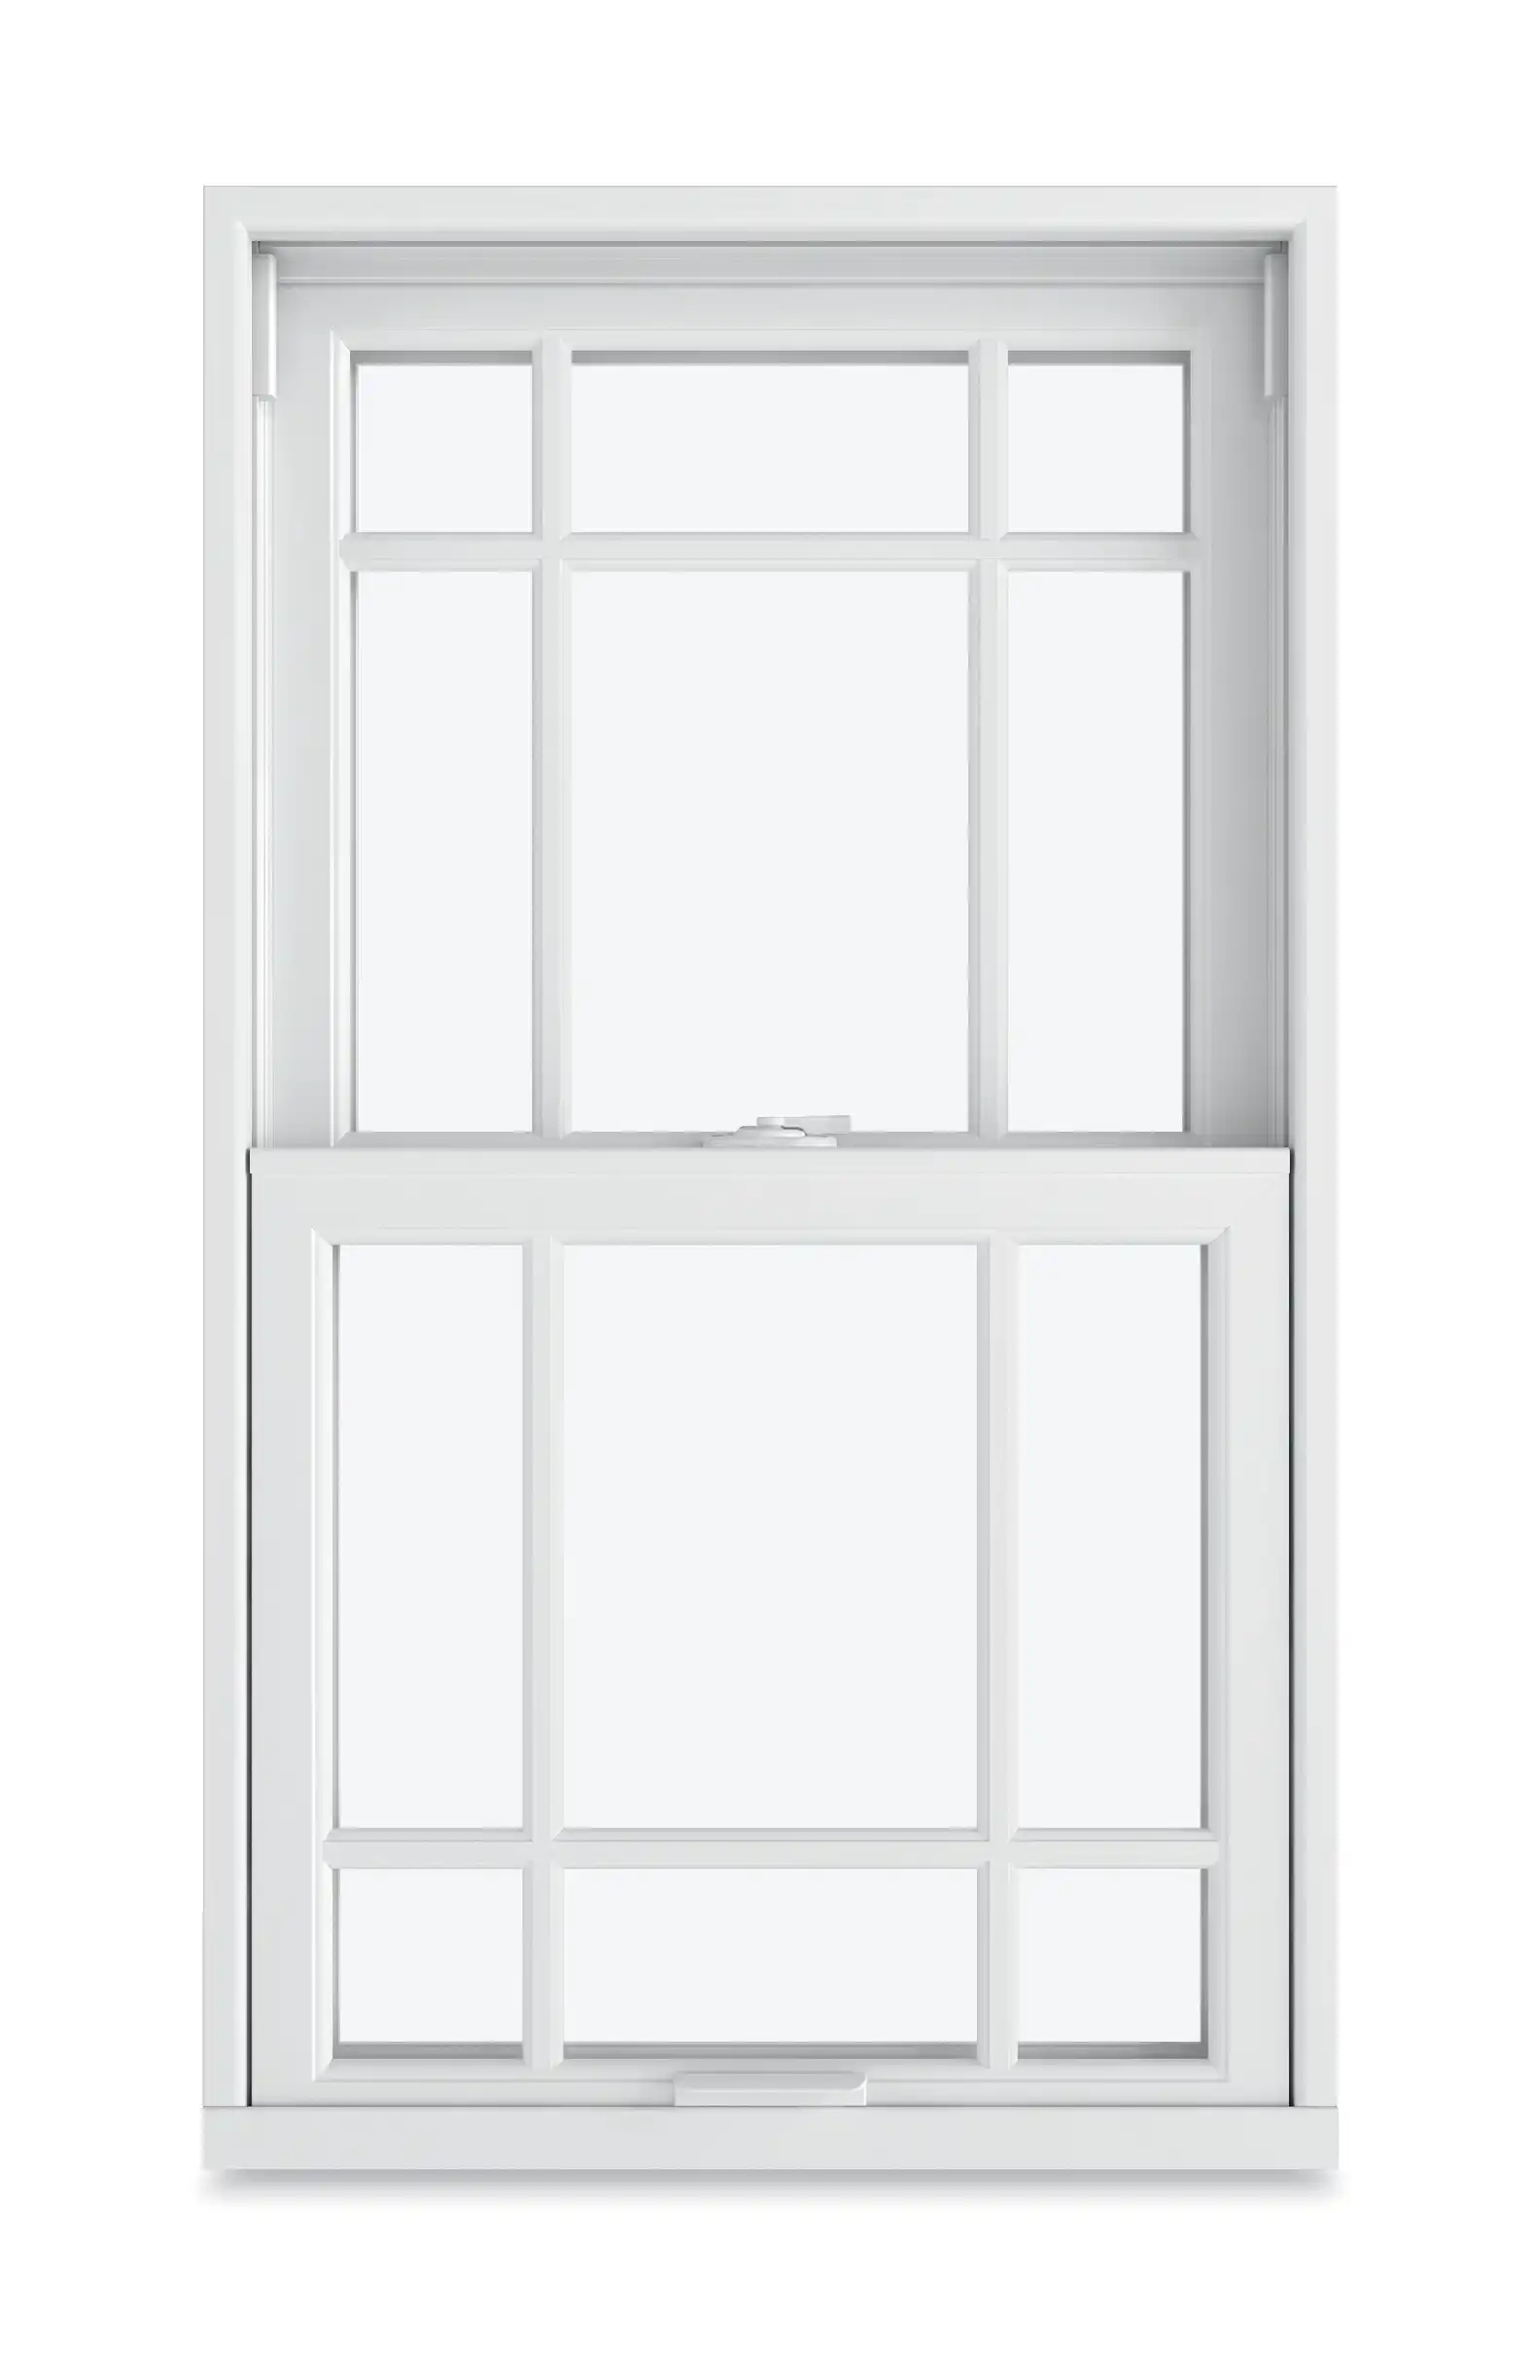 View of a white Marvin Double Hung window with a Prairie 6 Lite divided lite style.